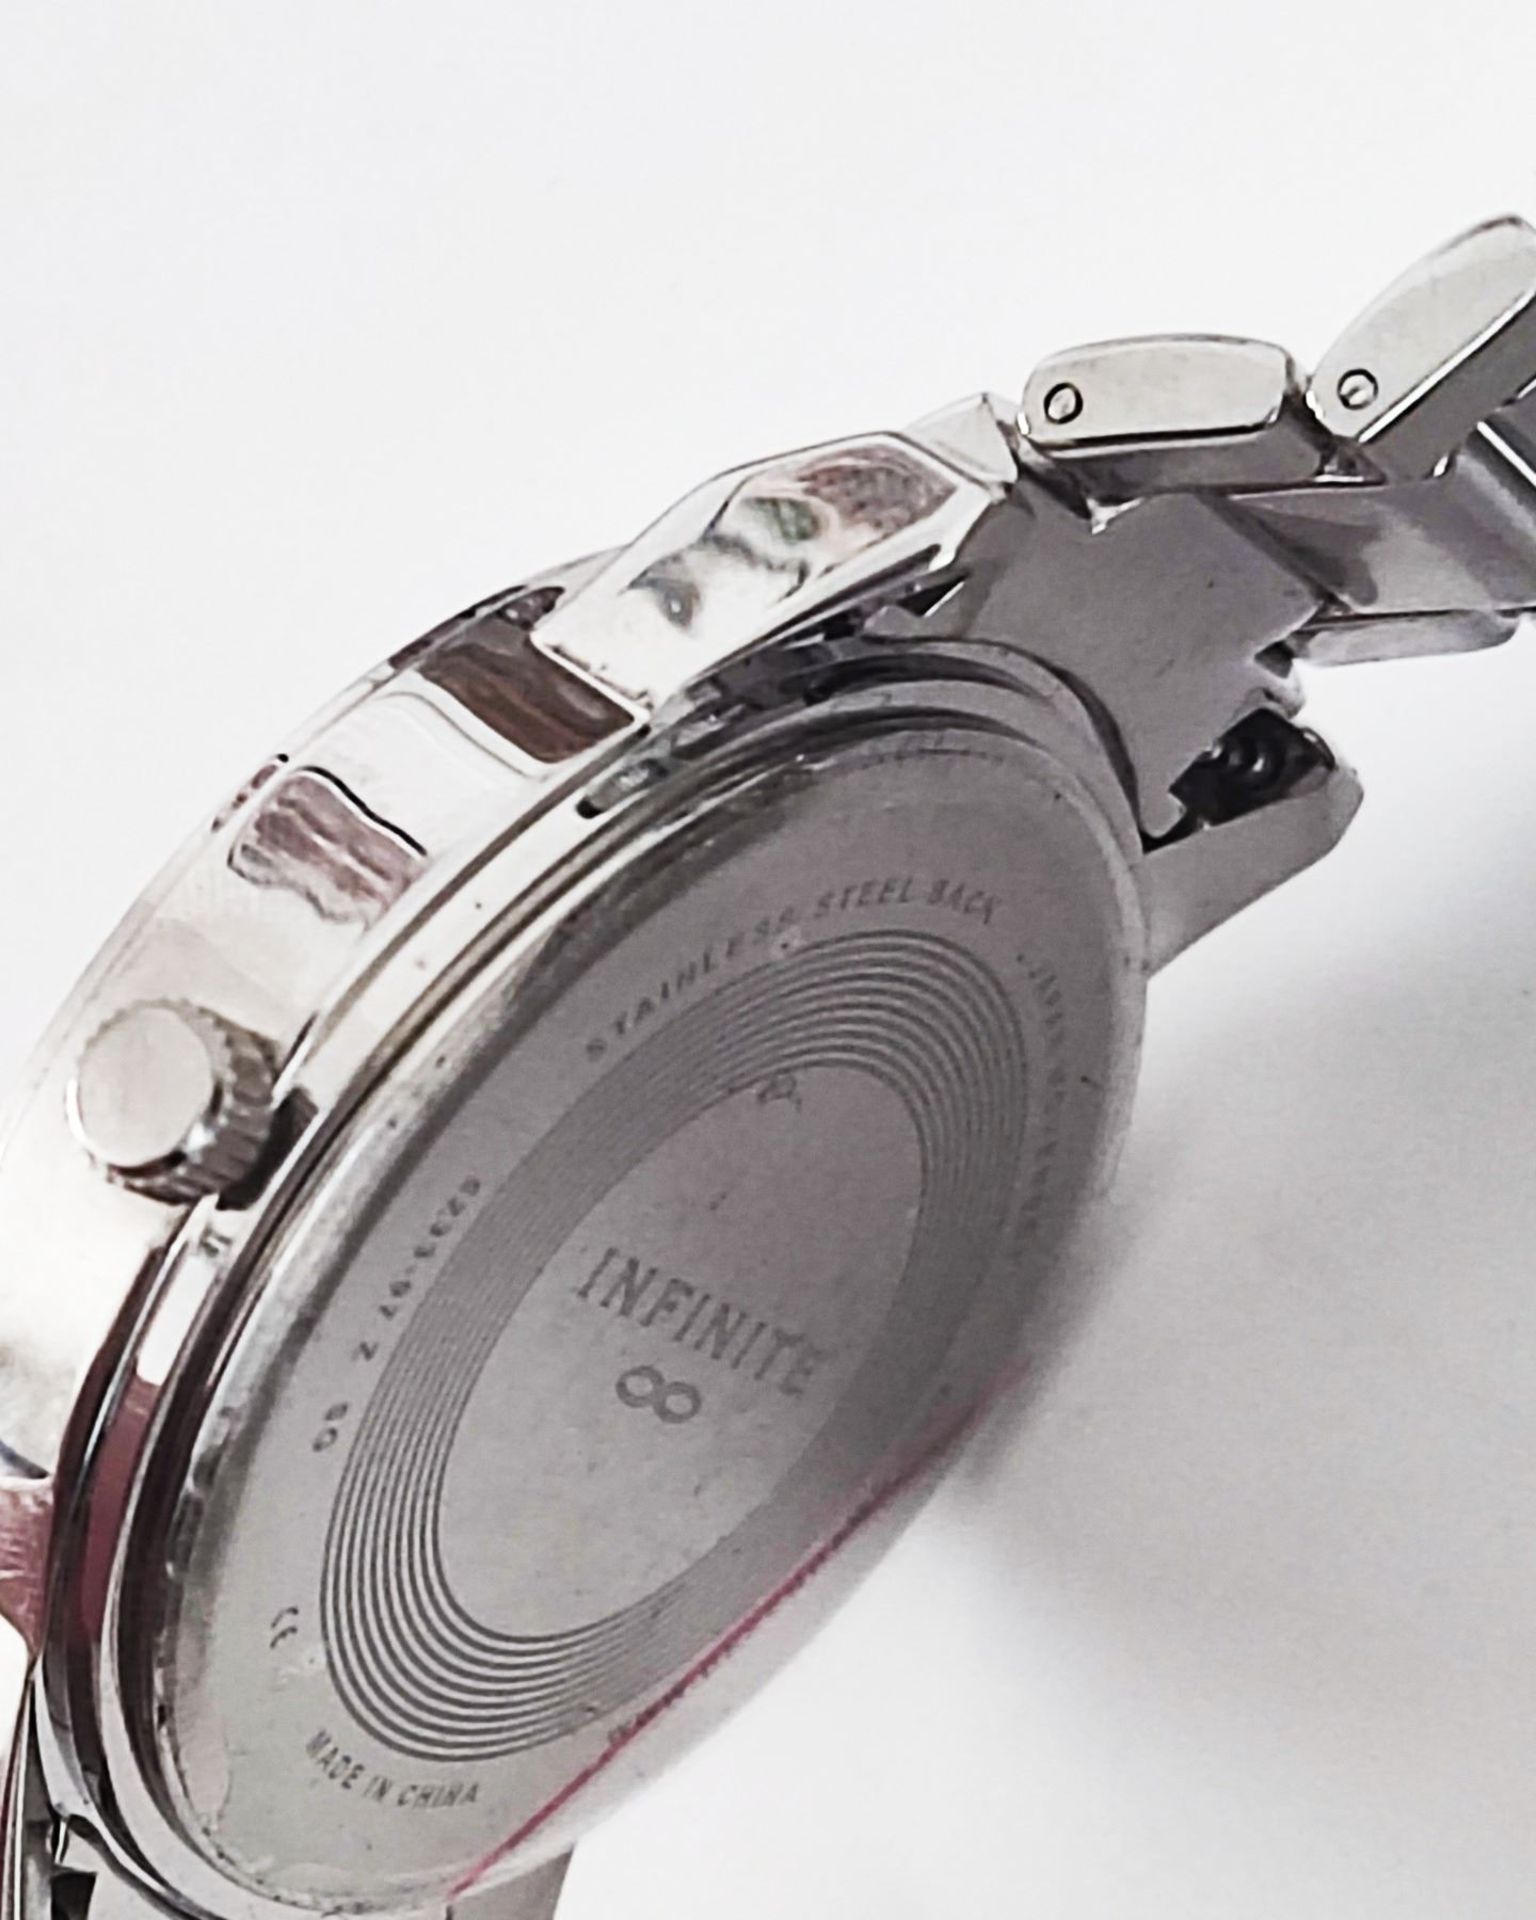 Gents Infinite wristwatch (5233-97) new with back film. - Image 3 of 3